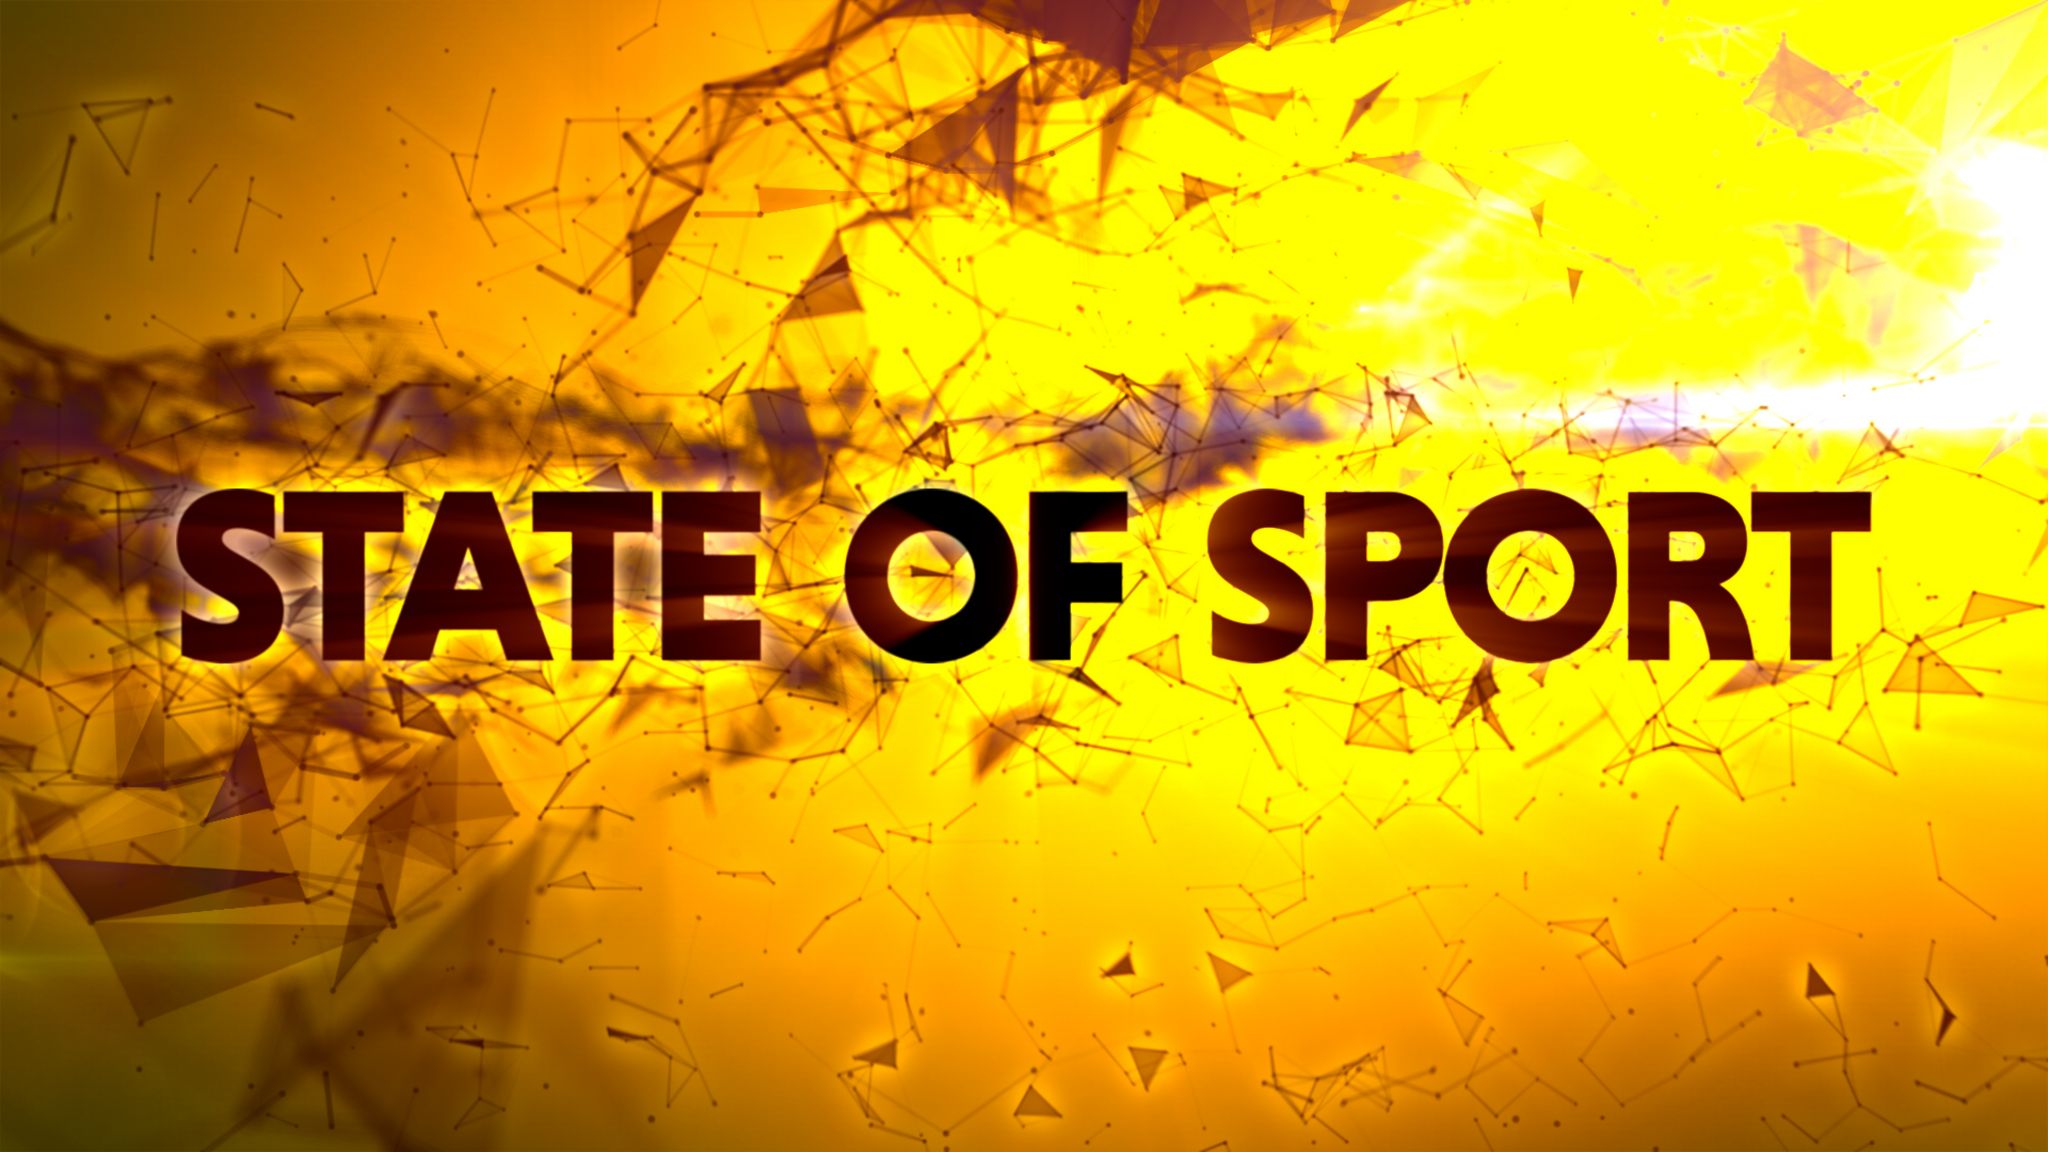 State of sport